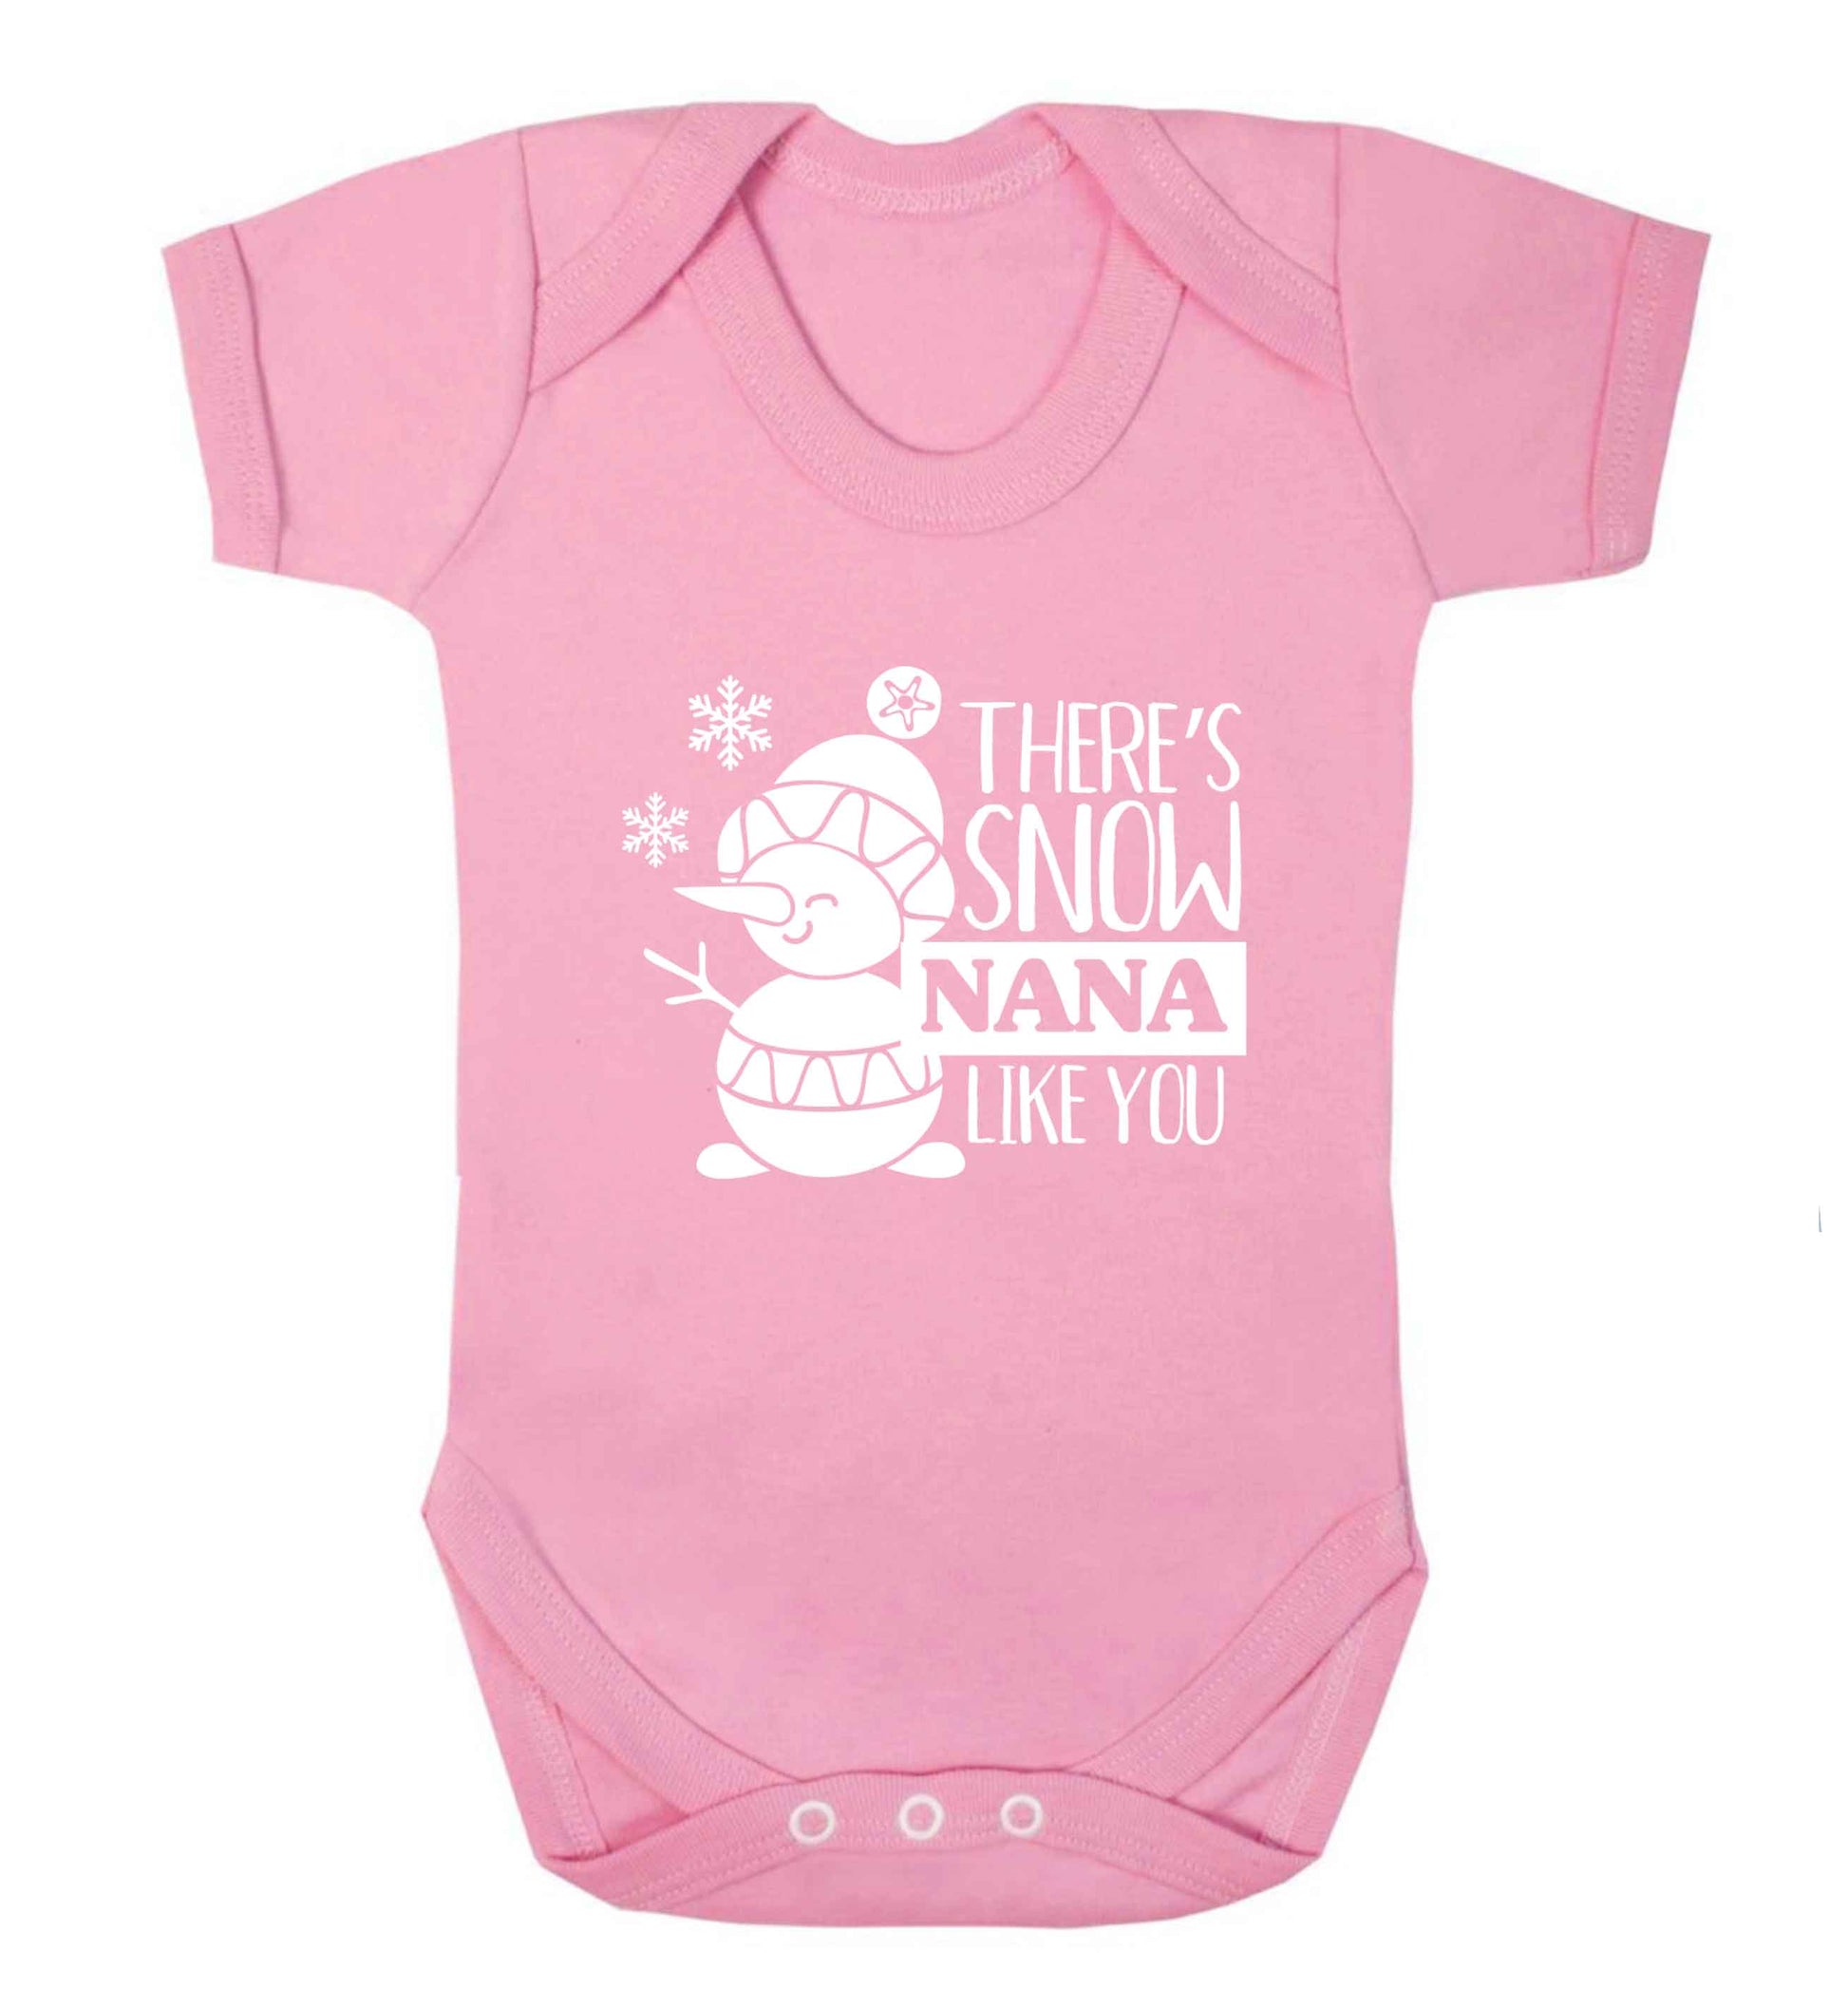 There's snow nana like you baby vest pale pink 18-24 months